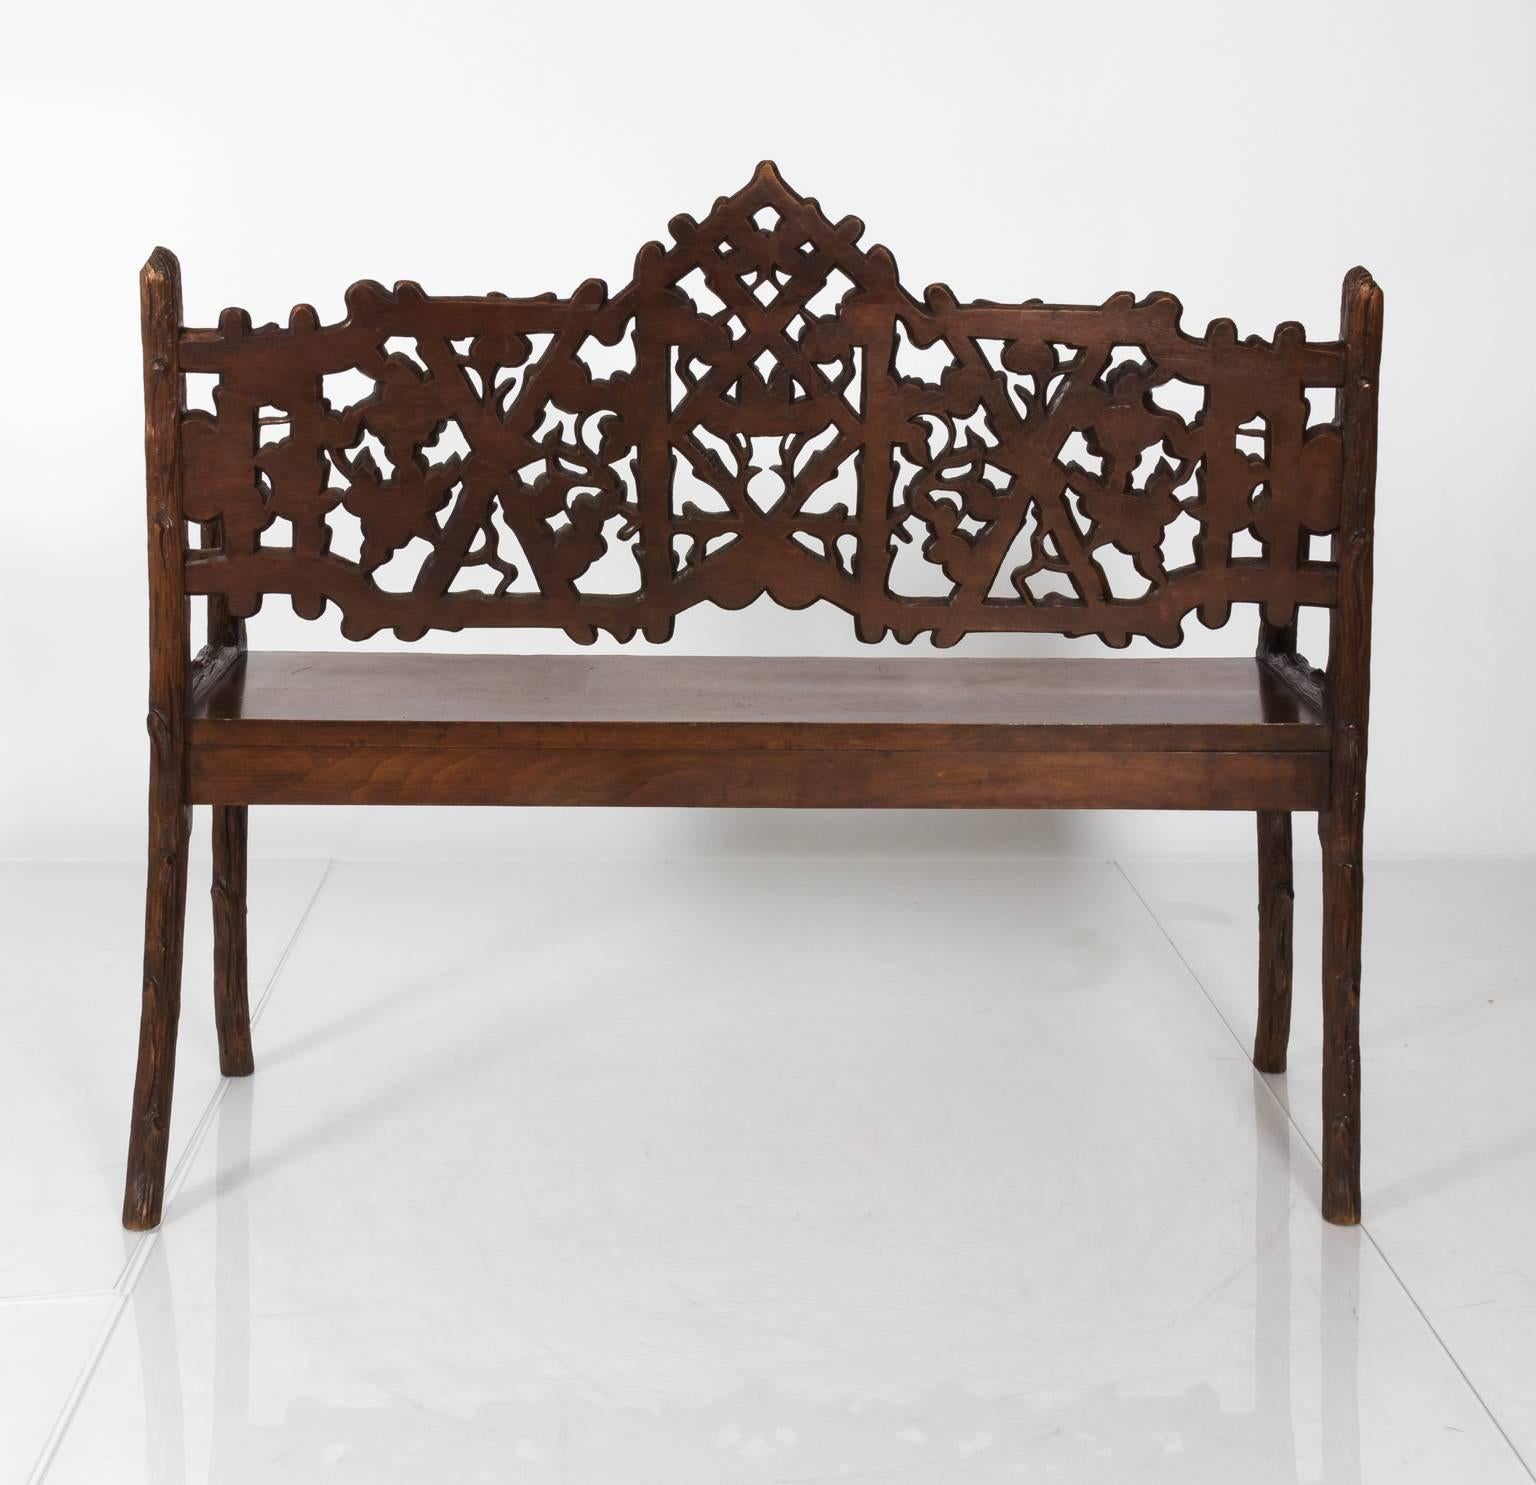 Black forest carved wooden bench, circa 1900s.
 